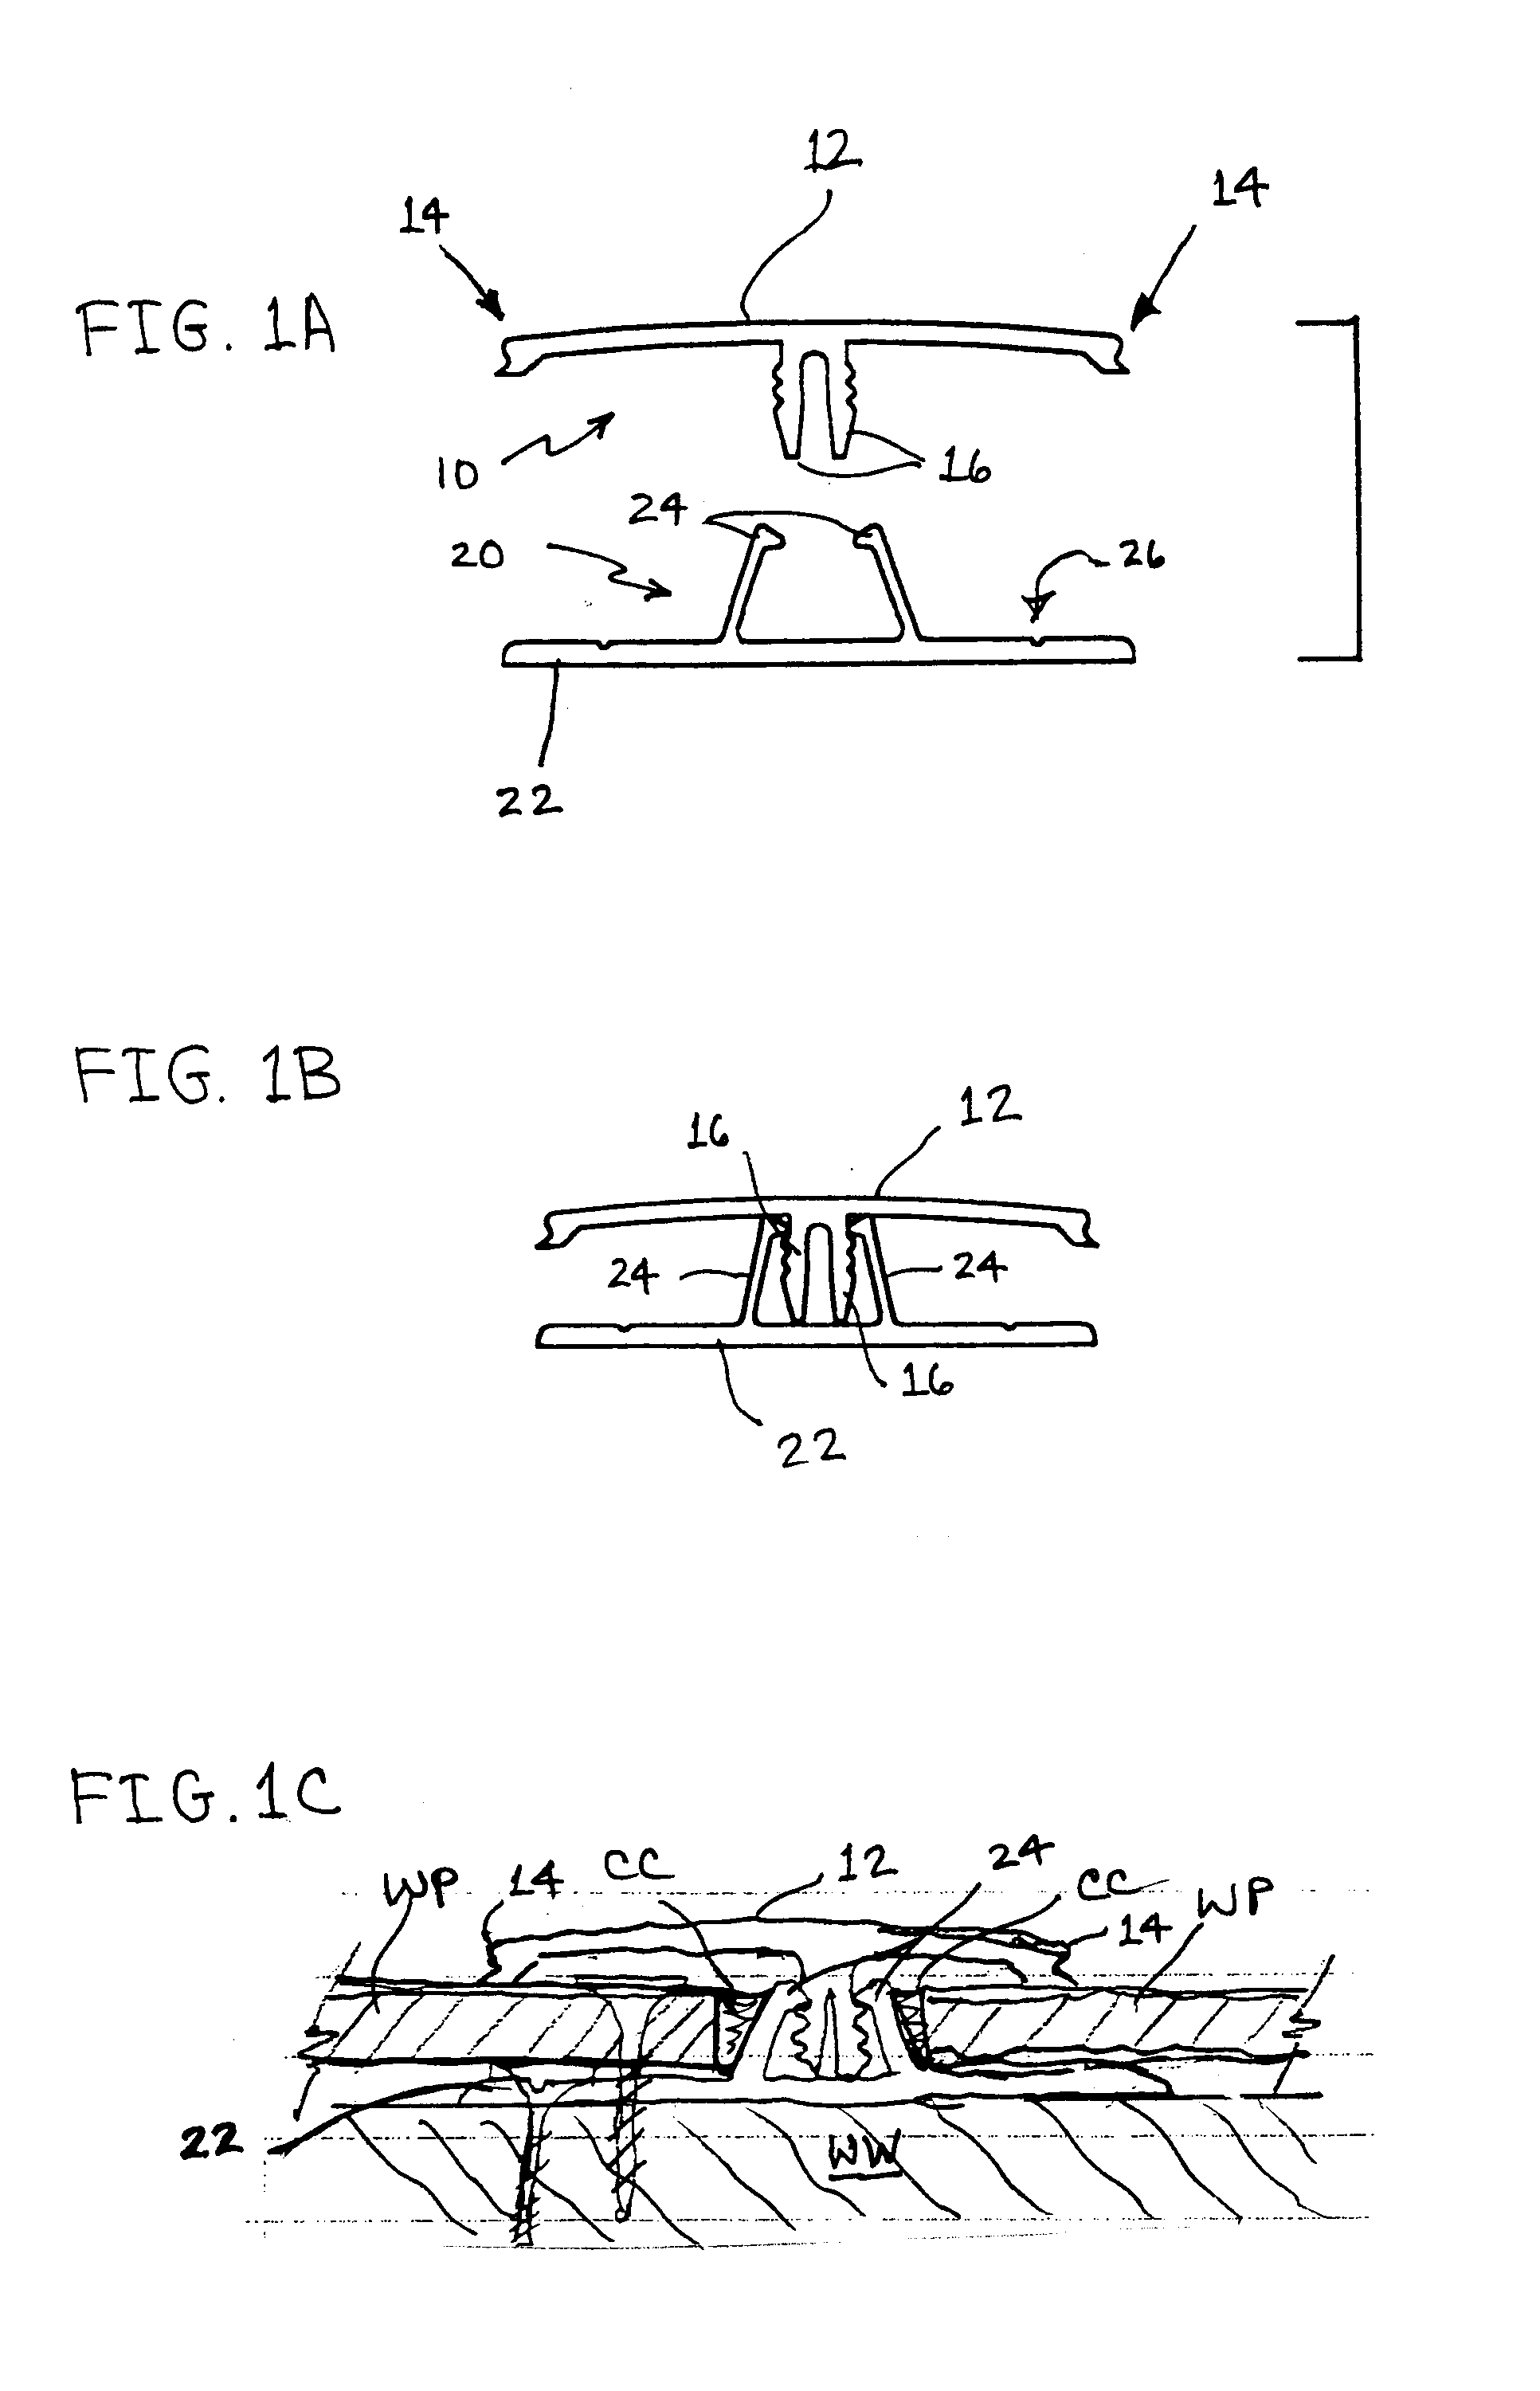 Extrusion devices for mounting wall panels